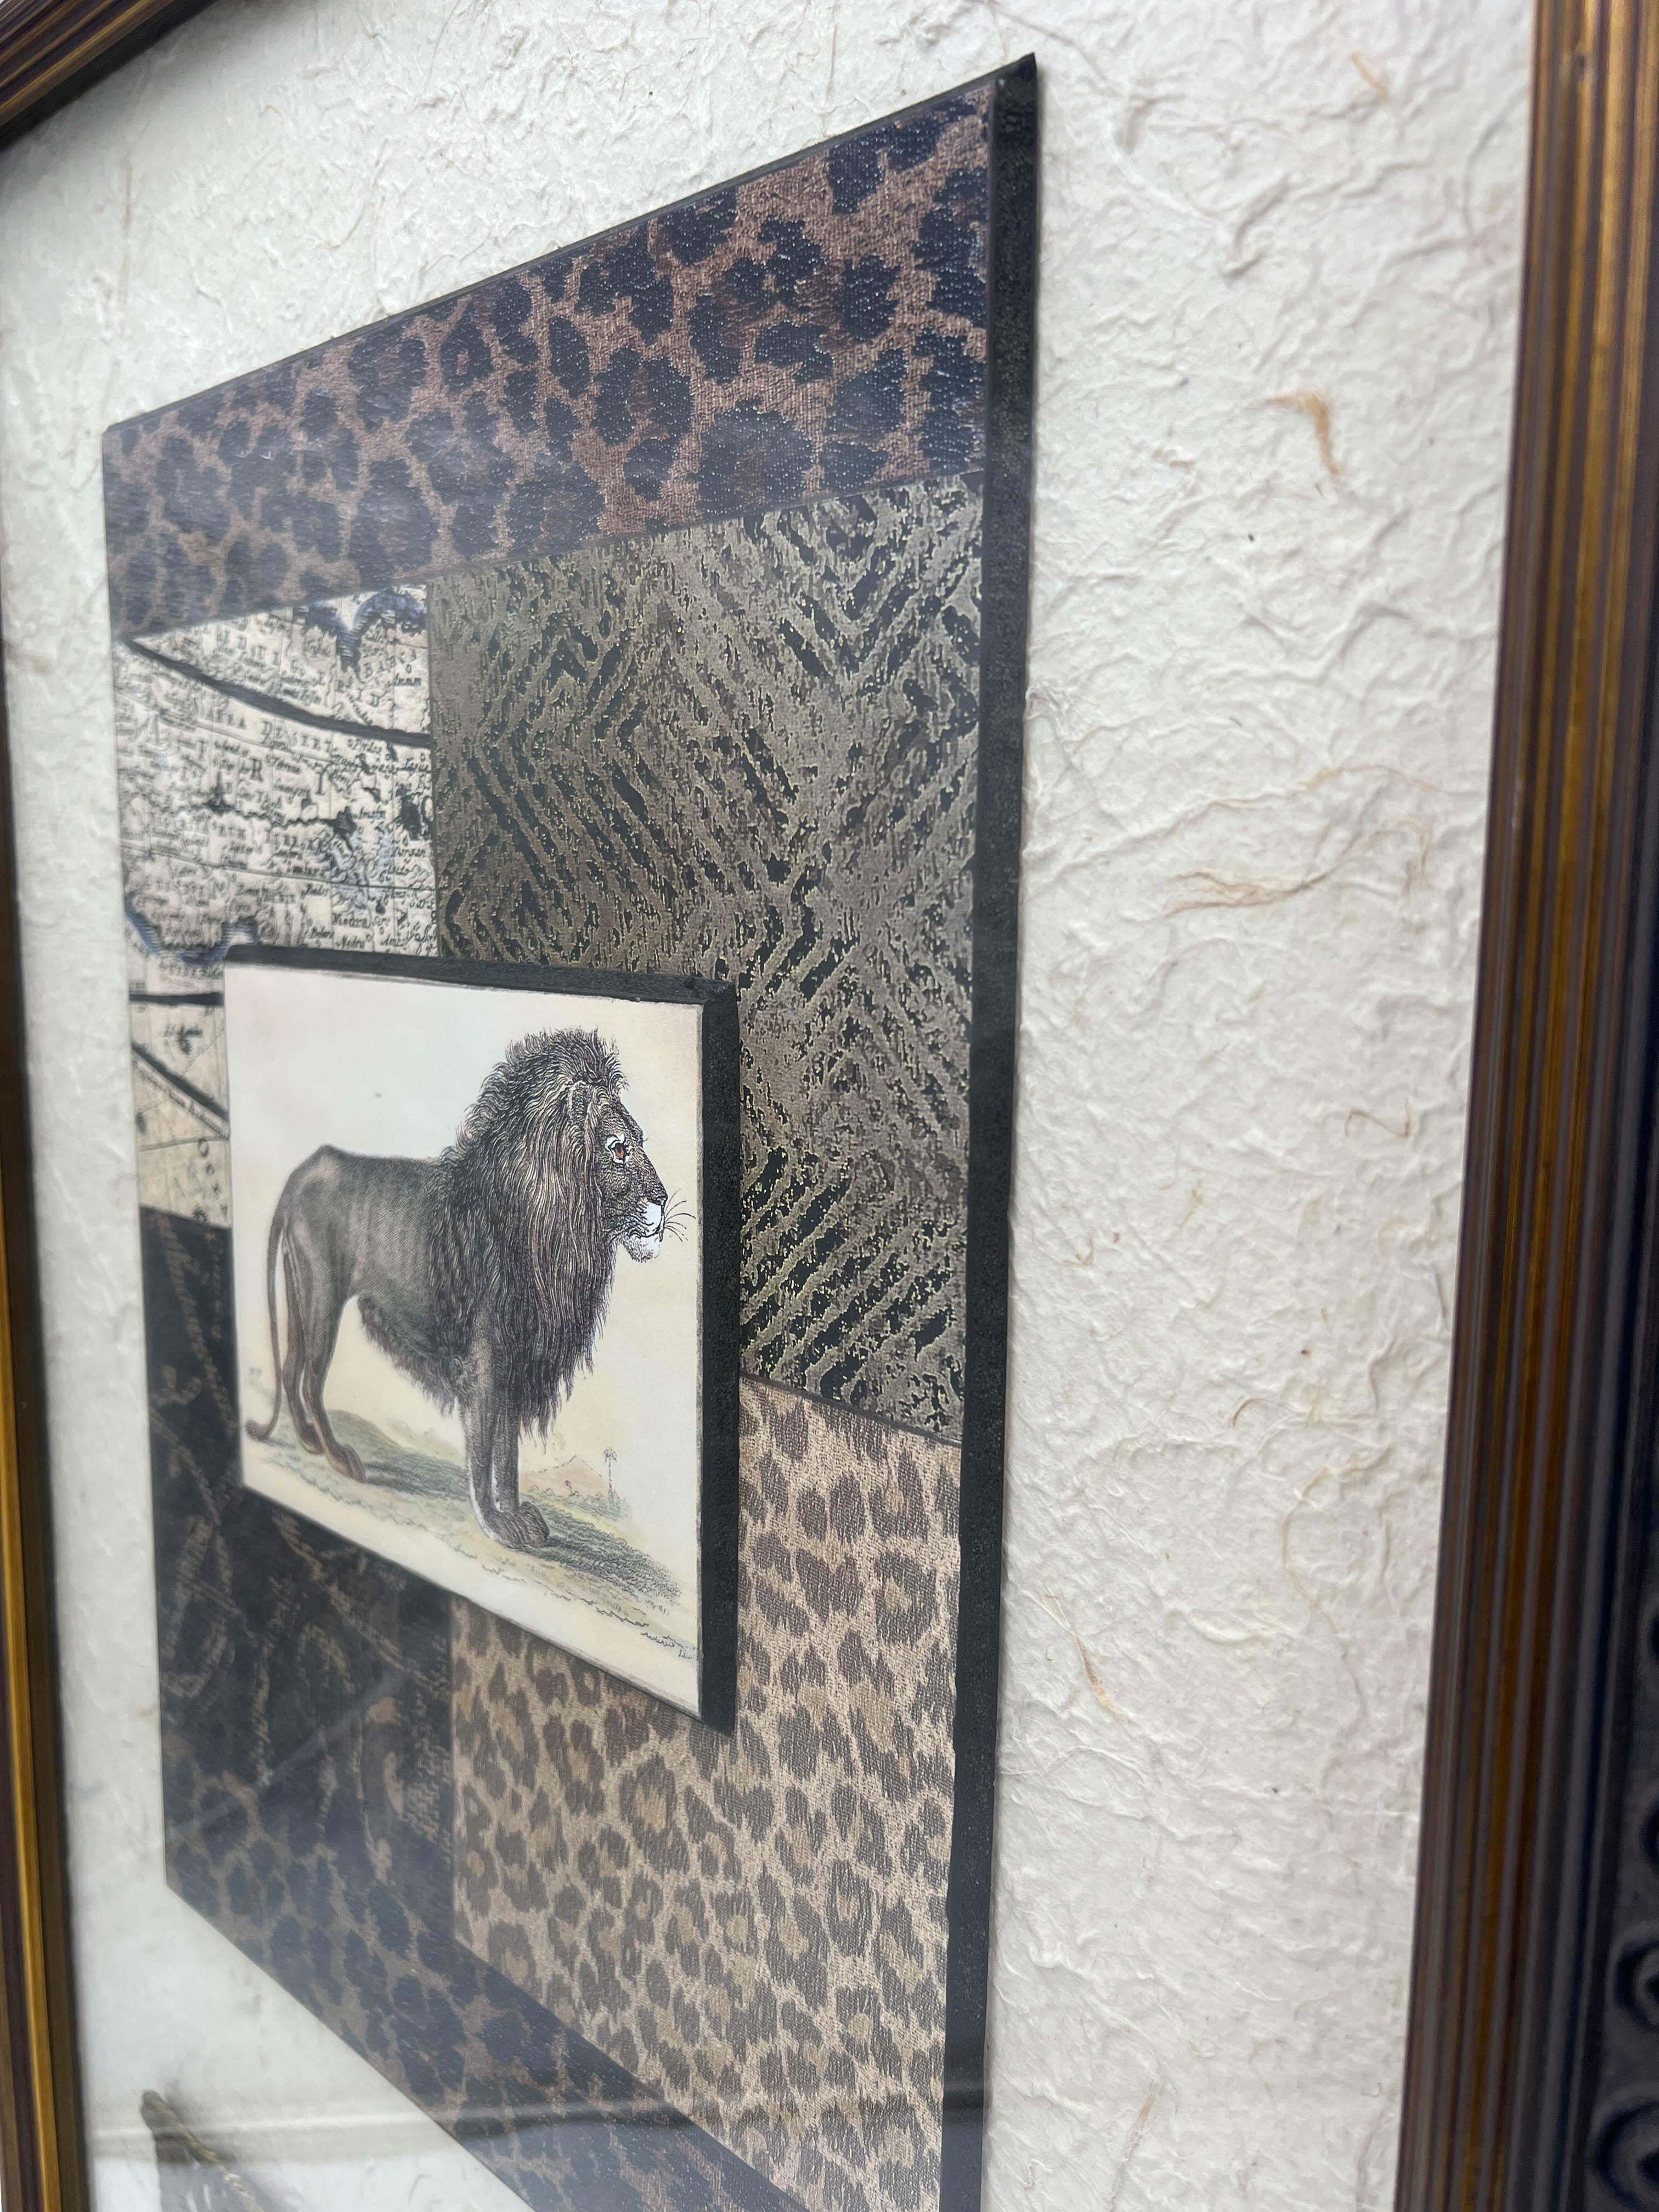 Exotic Mixed Media Wall Art in Ostrich Style Bone Frame by John Richard  For Sale 1